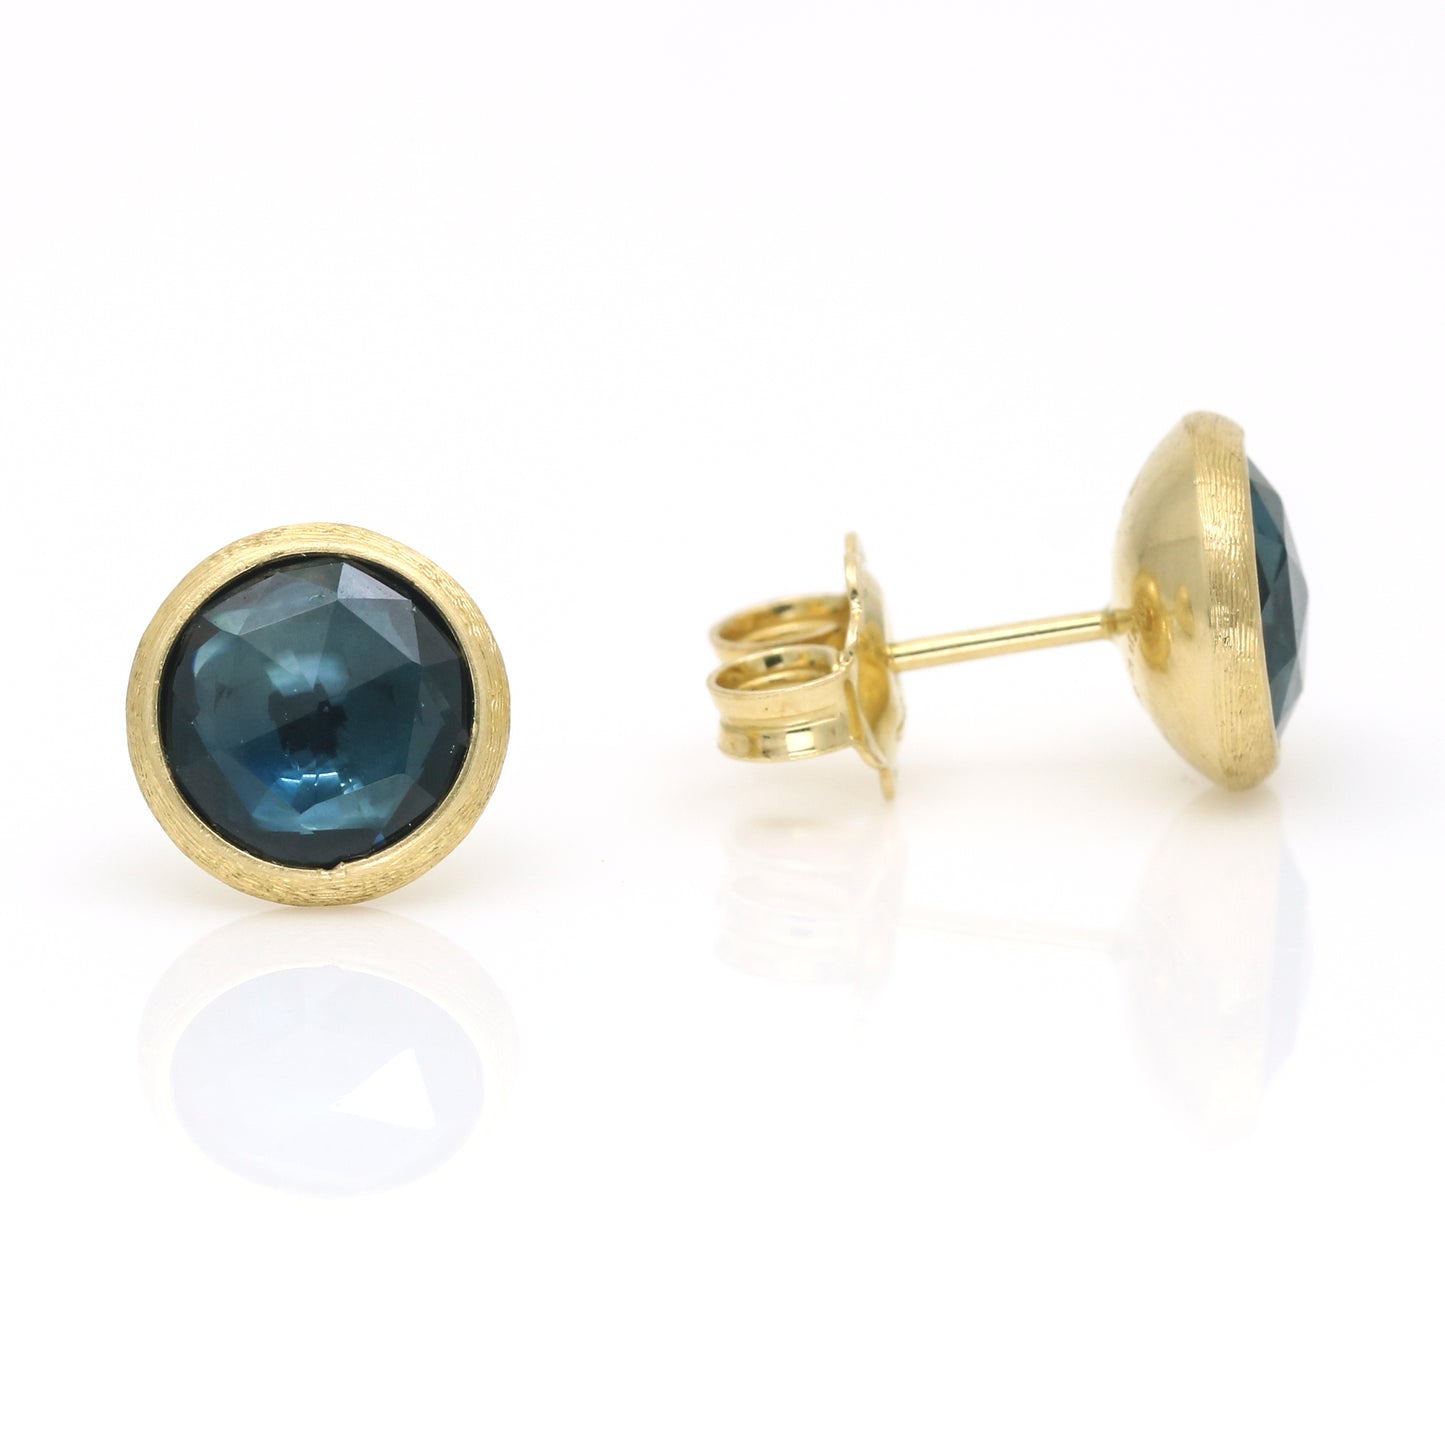 Marco Bicego Jaipur Color Collection Hampton Blue Topaz Stud Earrings in 18k Yellow Gold